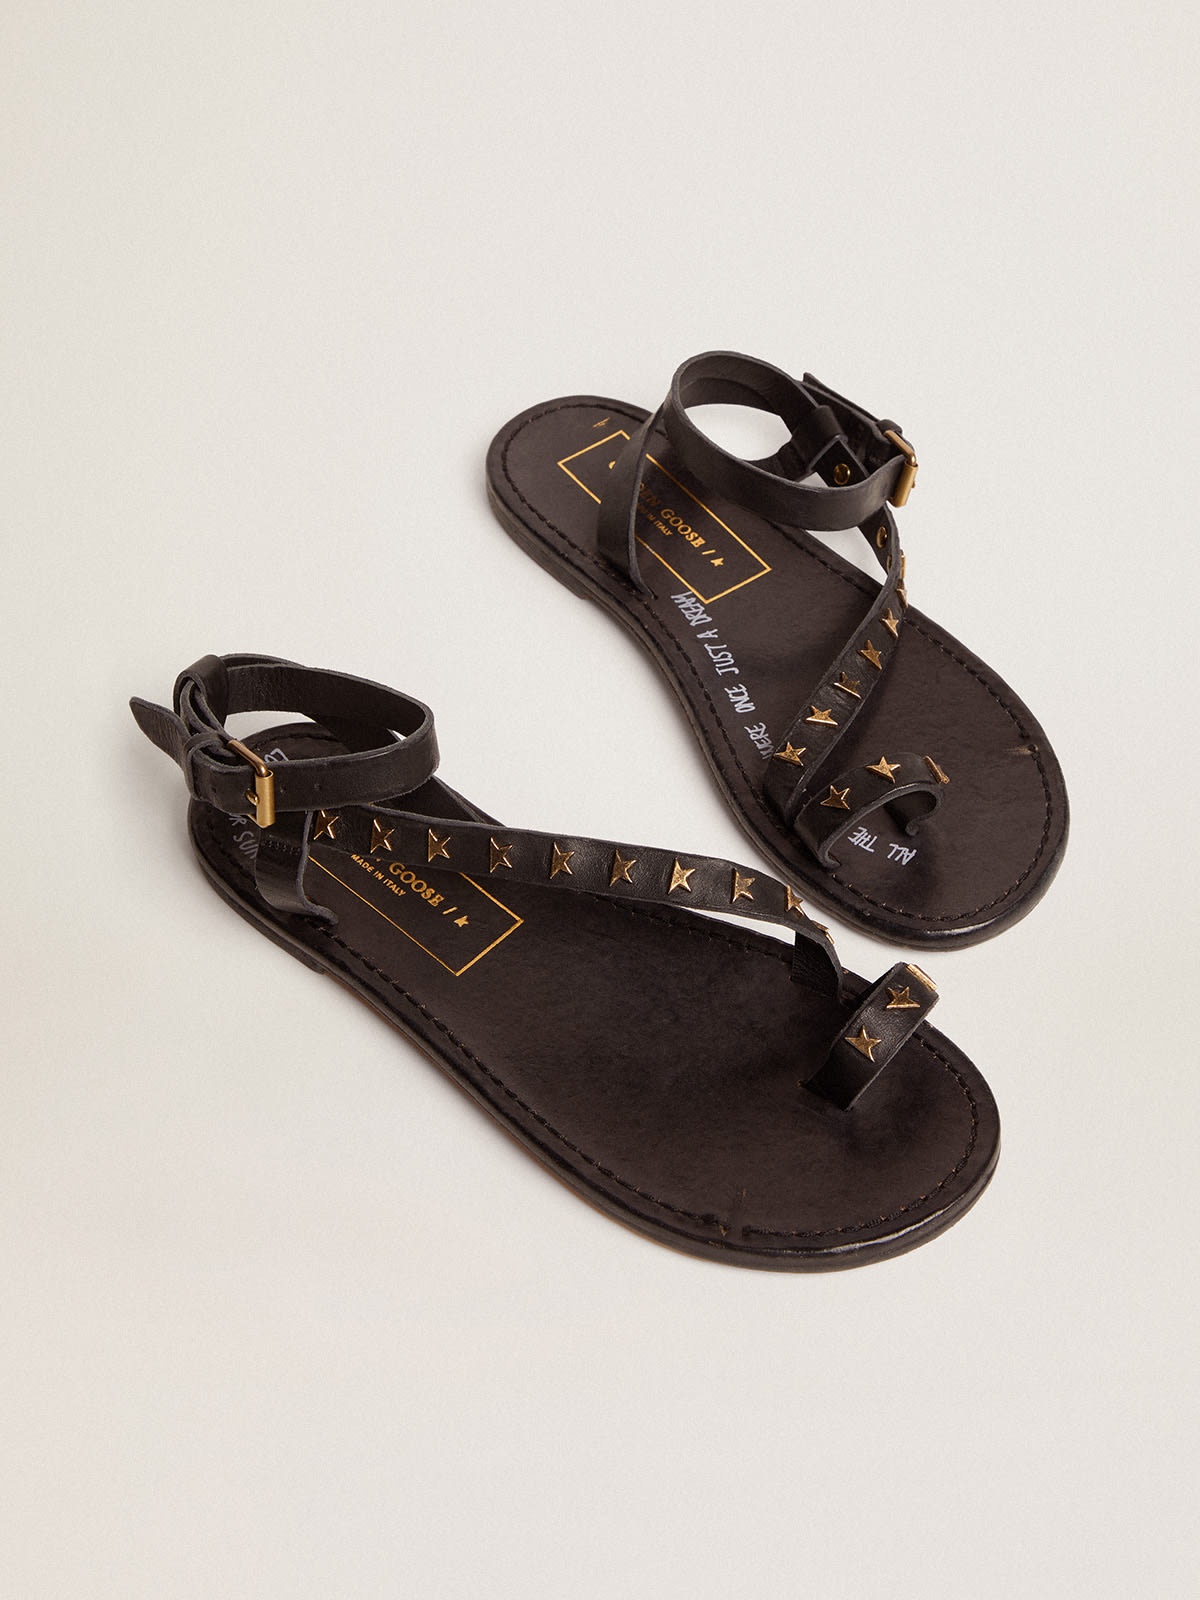 Women's flat sandals in black leather with gold stars - 2